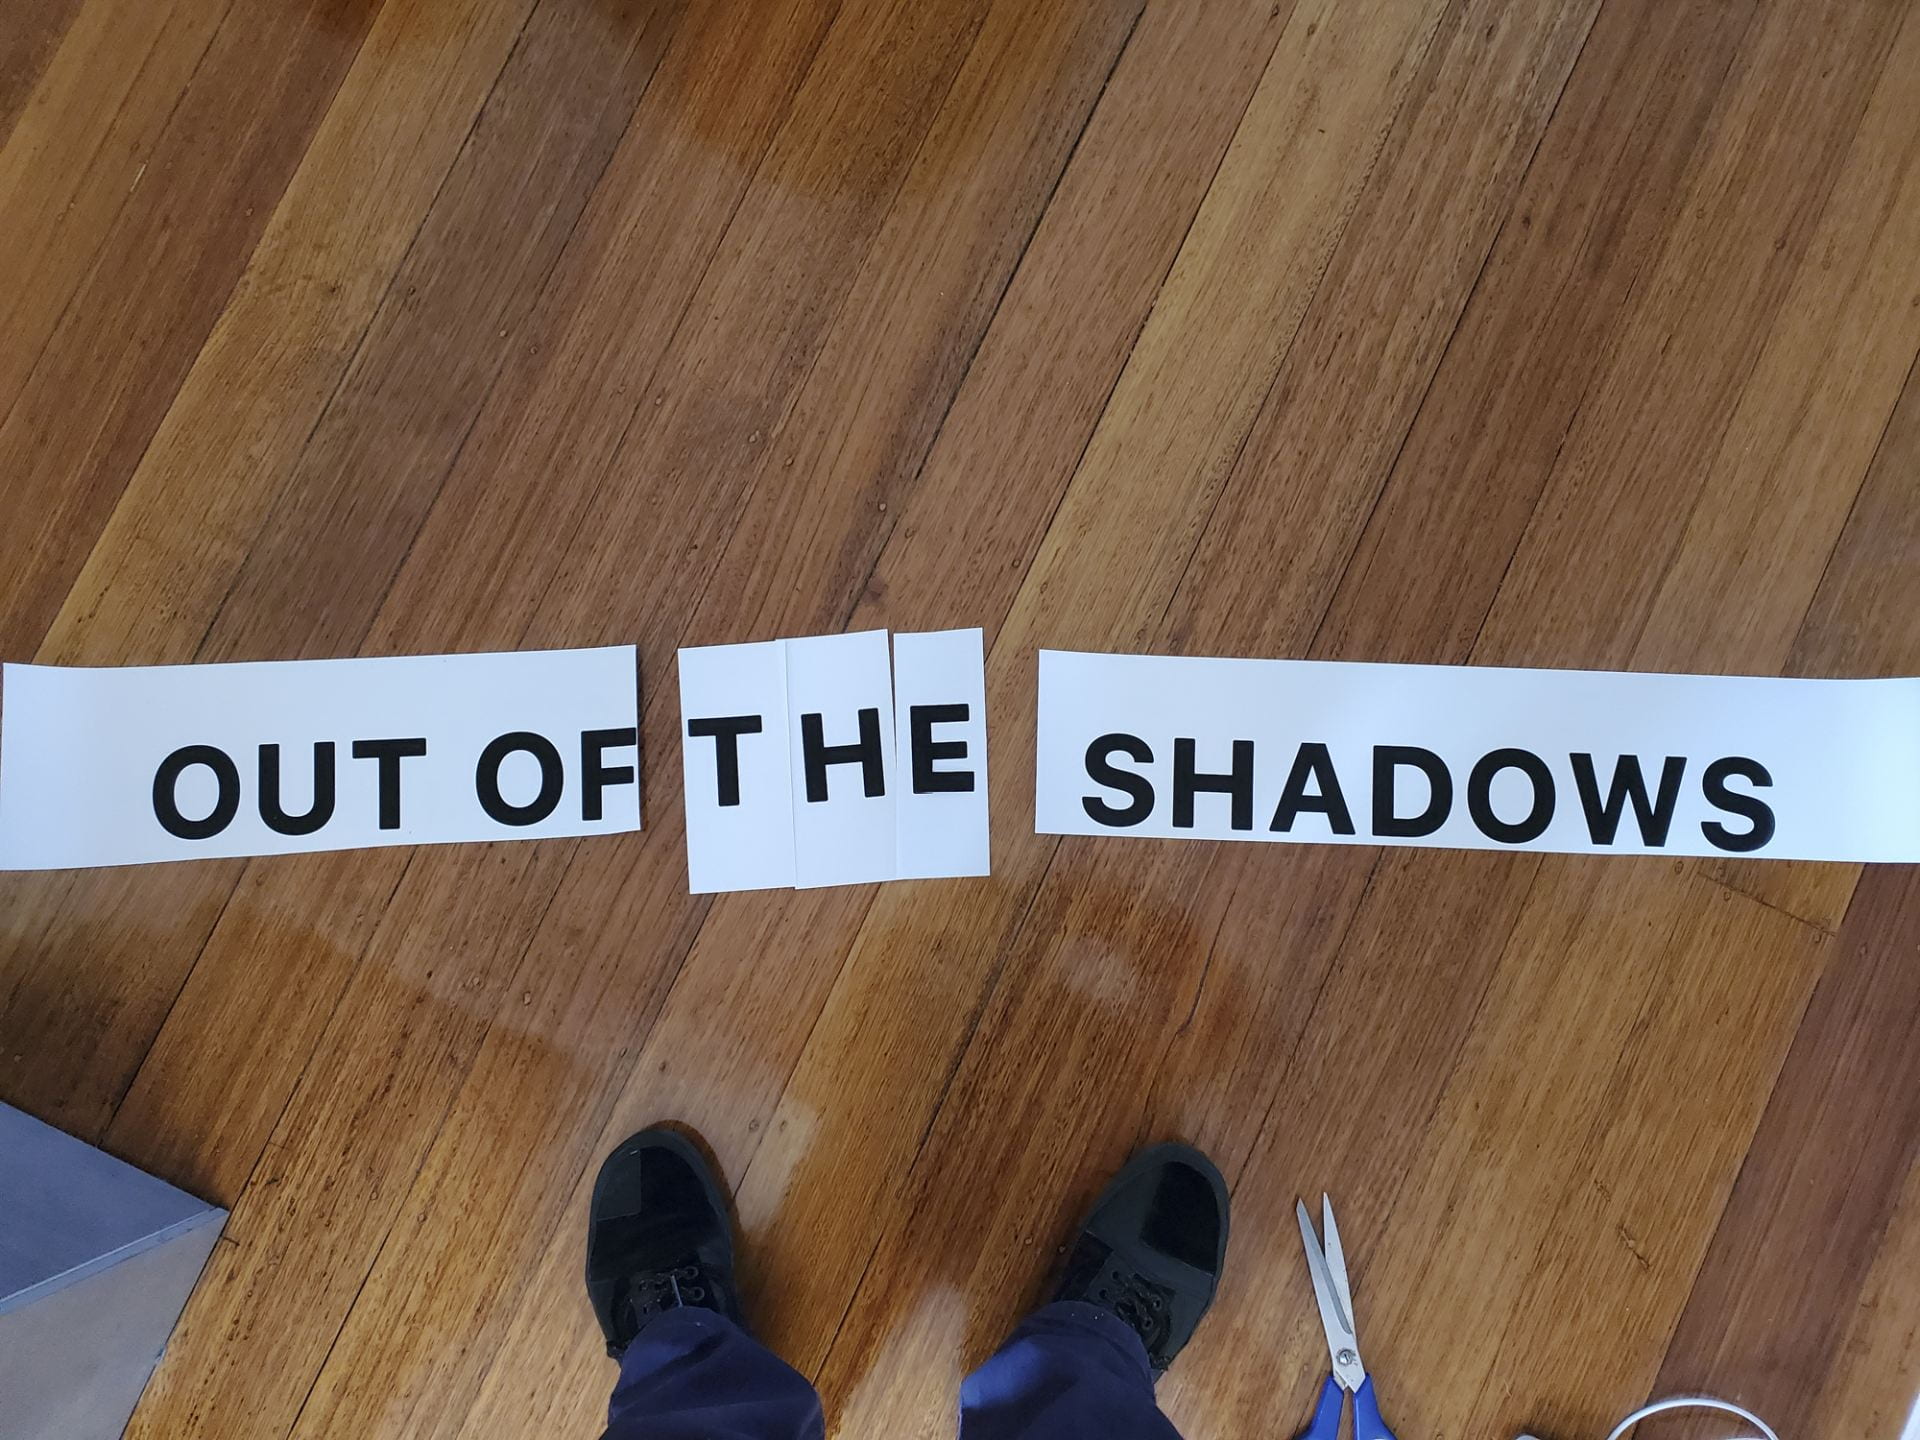 Work on the title 'Out of the Shadows'